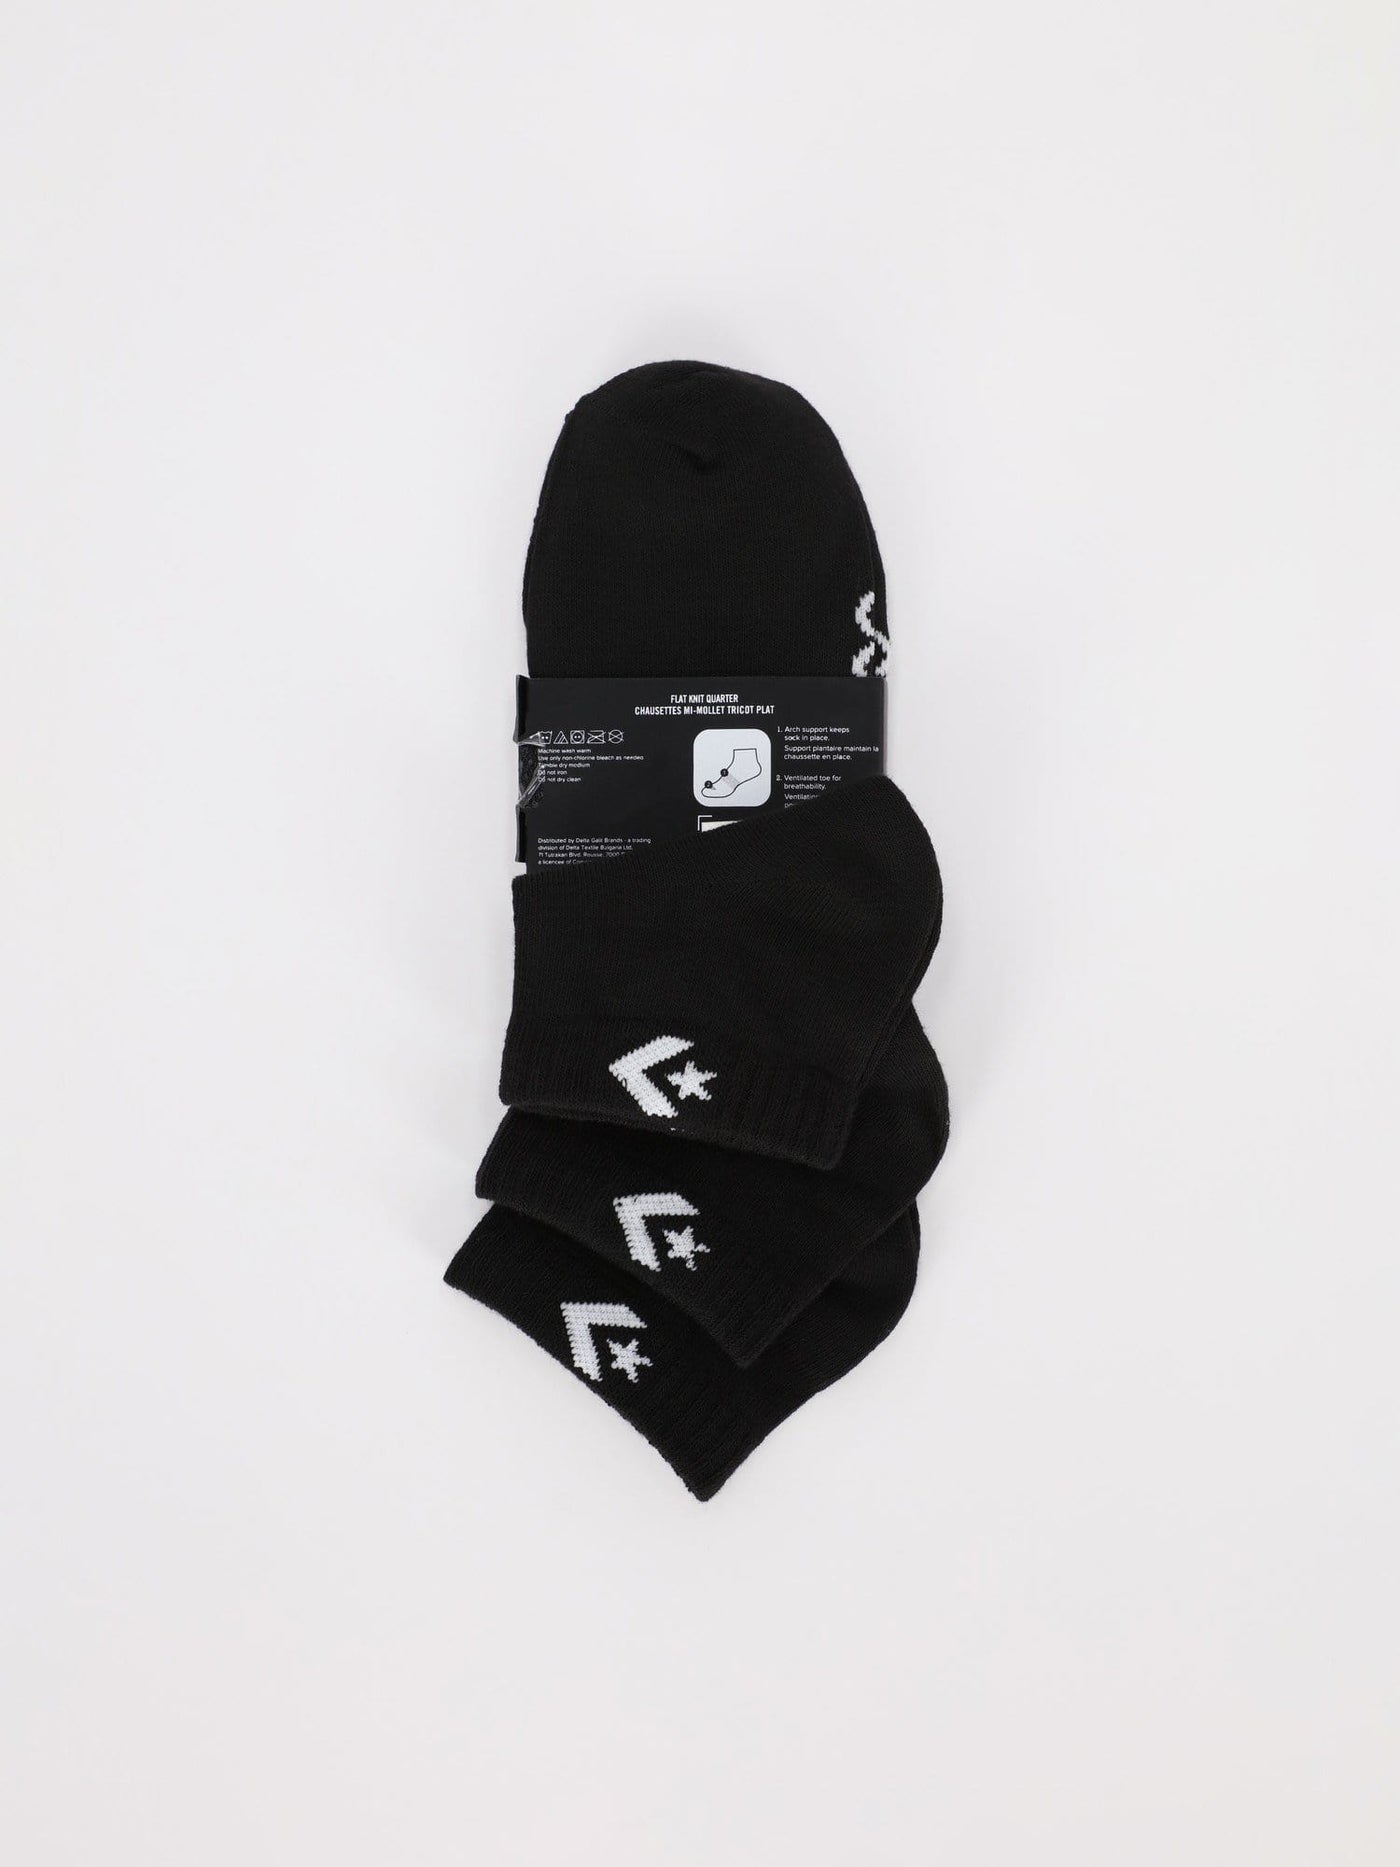 Converse Other Accessories 7 / 39-42 3 Pairs of Flat Knit Quarter Socks with Star Chevron Logo - Black